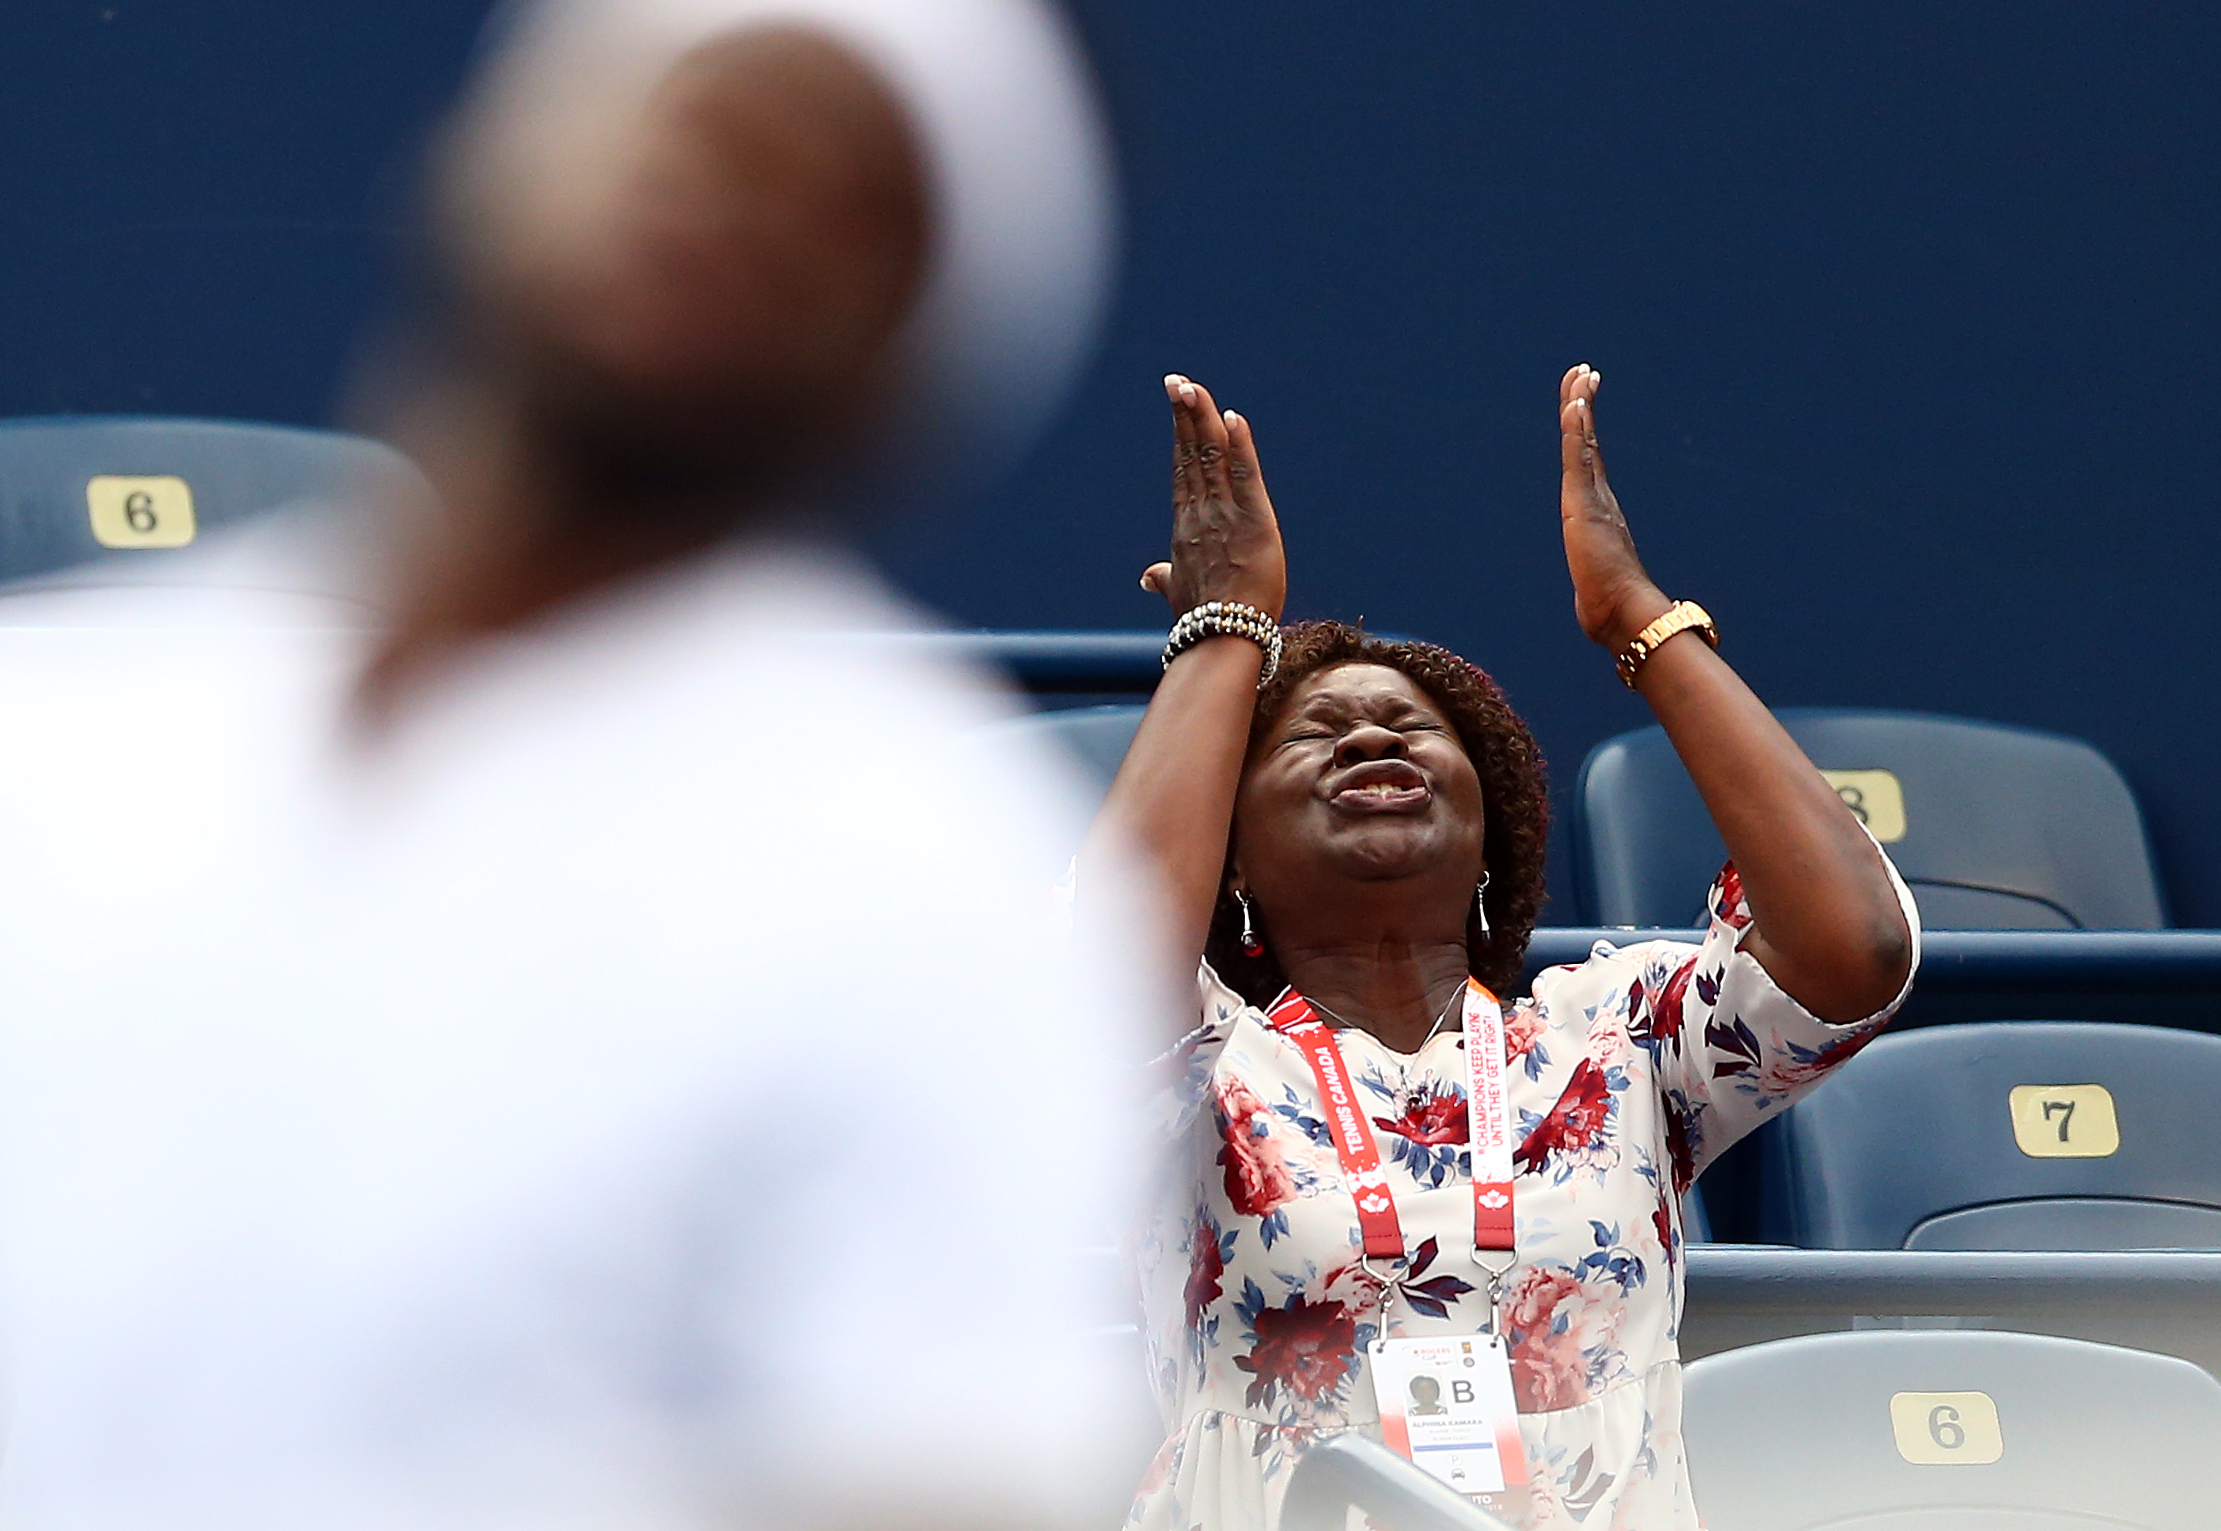 Alphina Kamara reacts after Frances Tiafoe missed a shot against Milos Raonic of Canada during a 2nd round match on Day 3 of the Rogers Cup at Aviva Centre on August 8, 2018, in Toronto, Canada. | Source: Getty Images